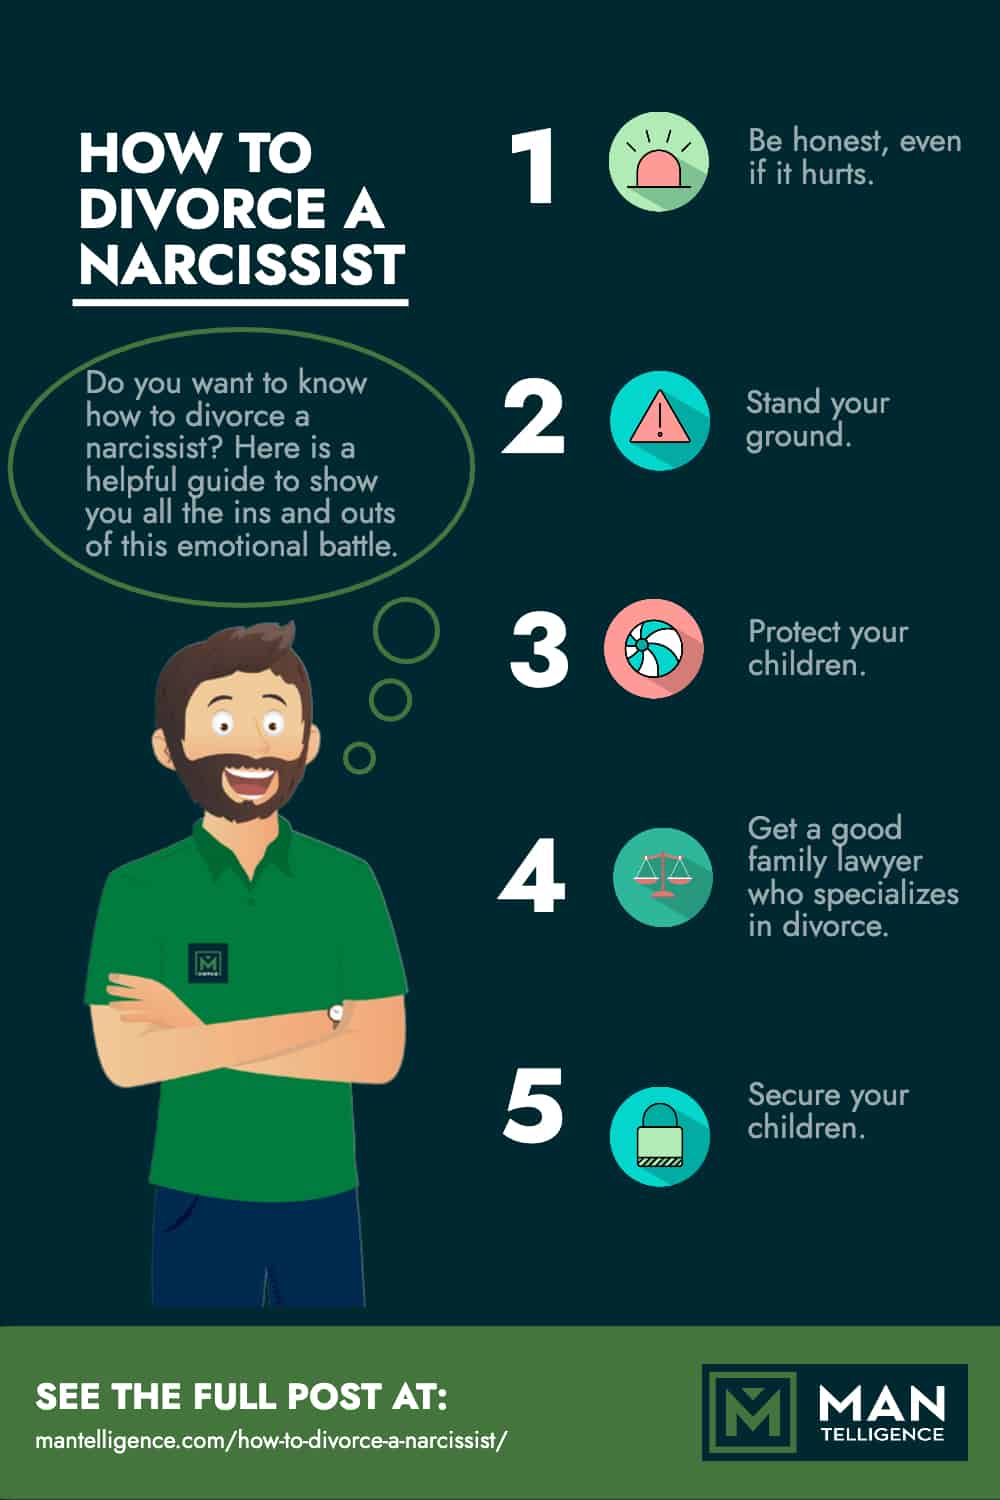 How To Divorce A Narcissist - Infographic